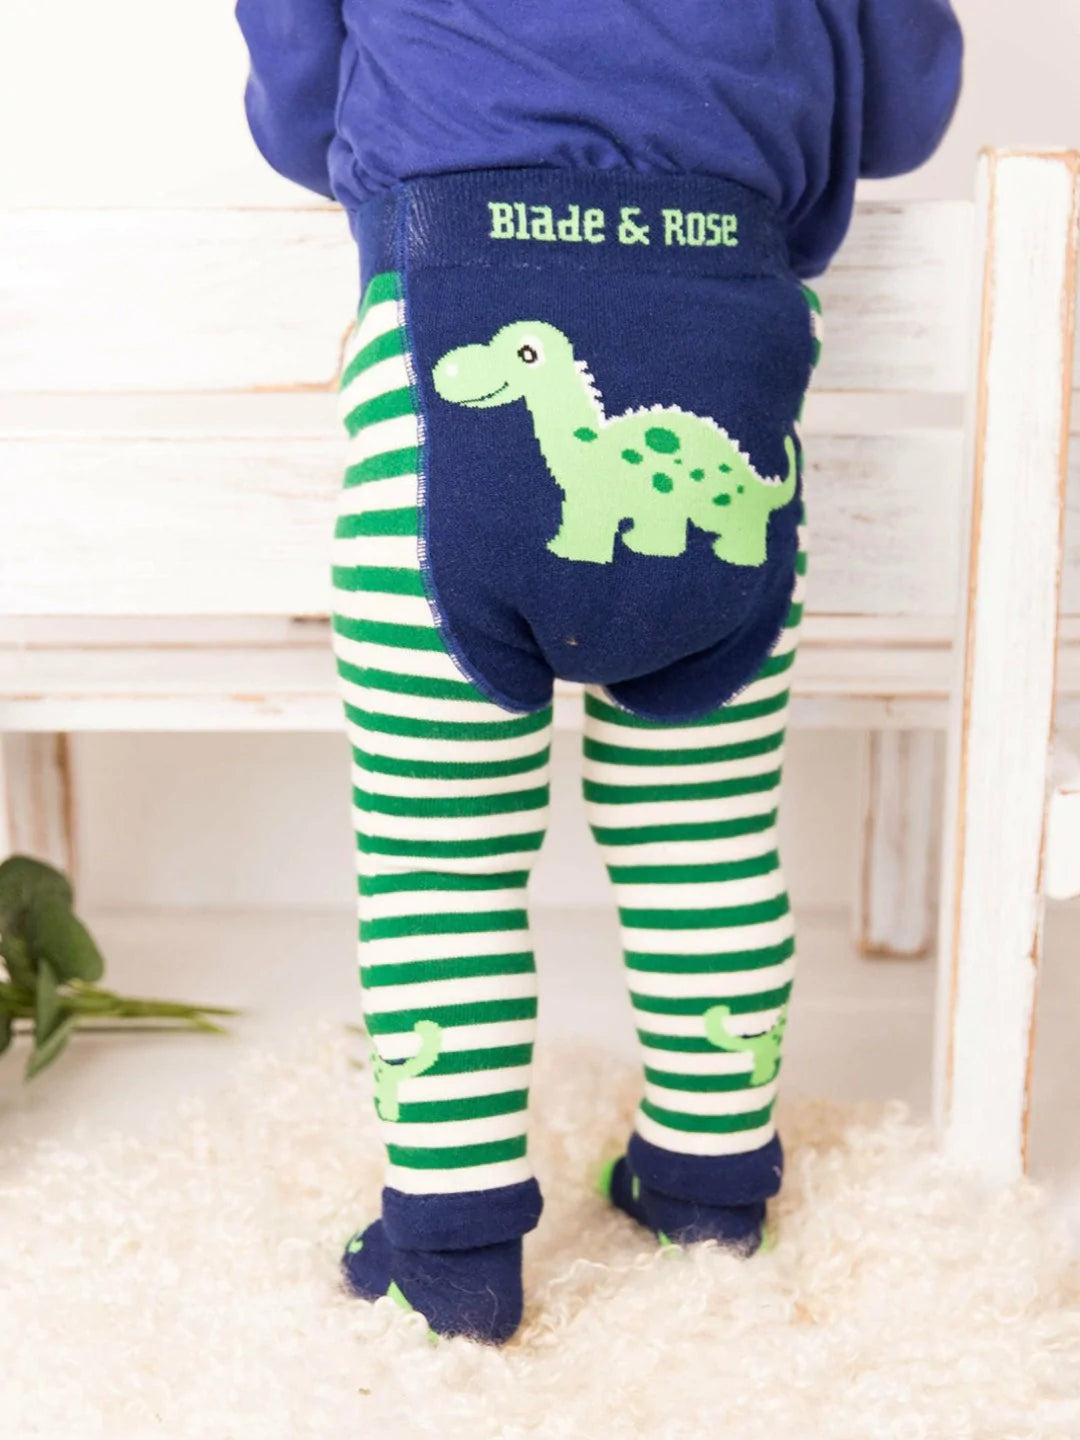 blade & rose maple the diplodocus leggings at whippersnappers